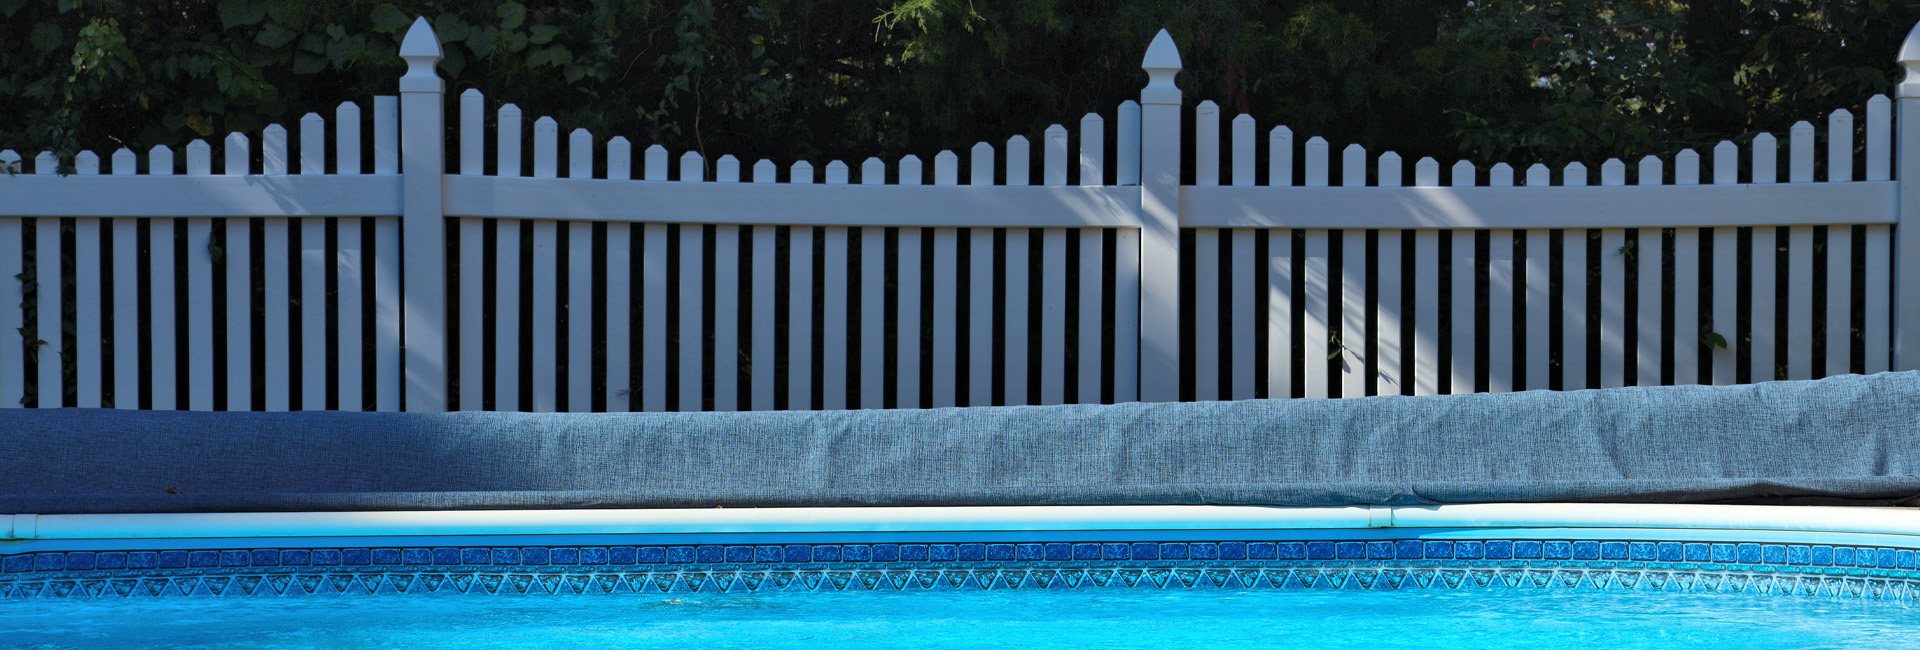 Affordable Vinyl Picket Fence Installed in Florida Backyard with Pool